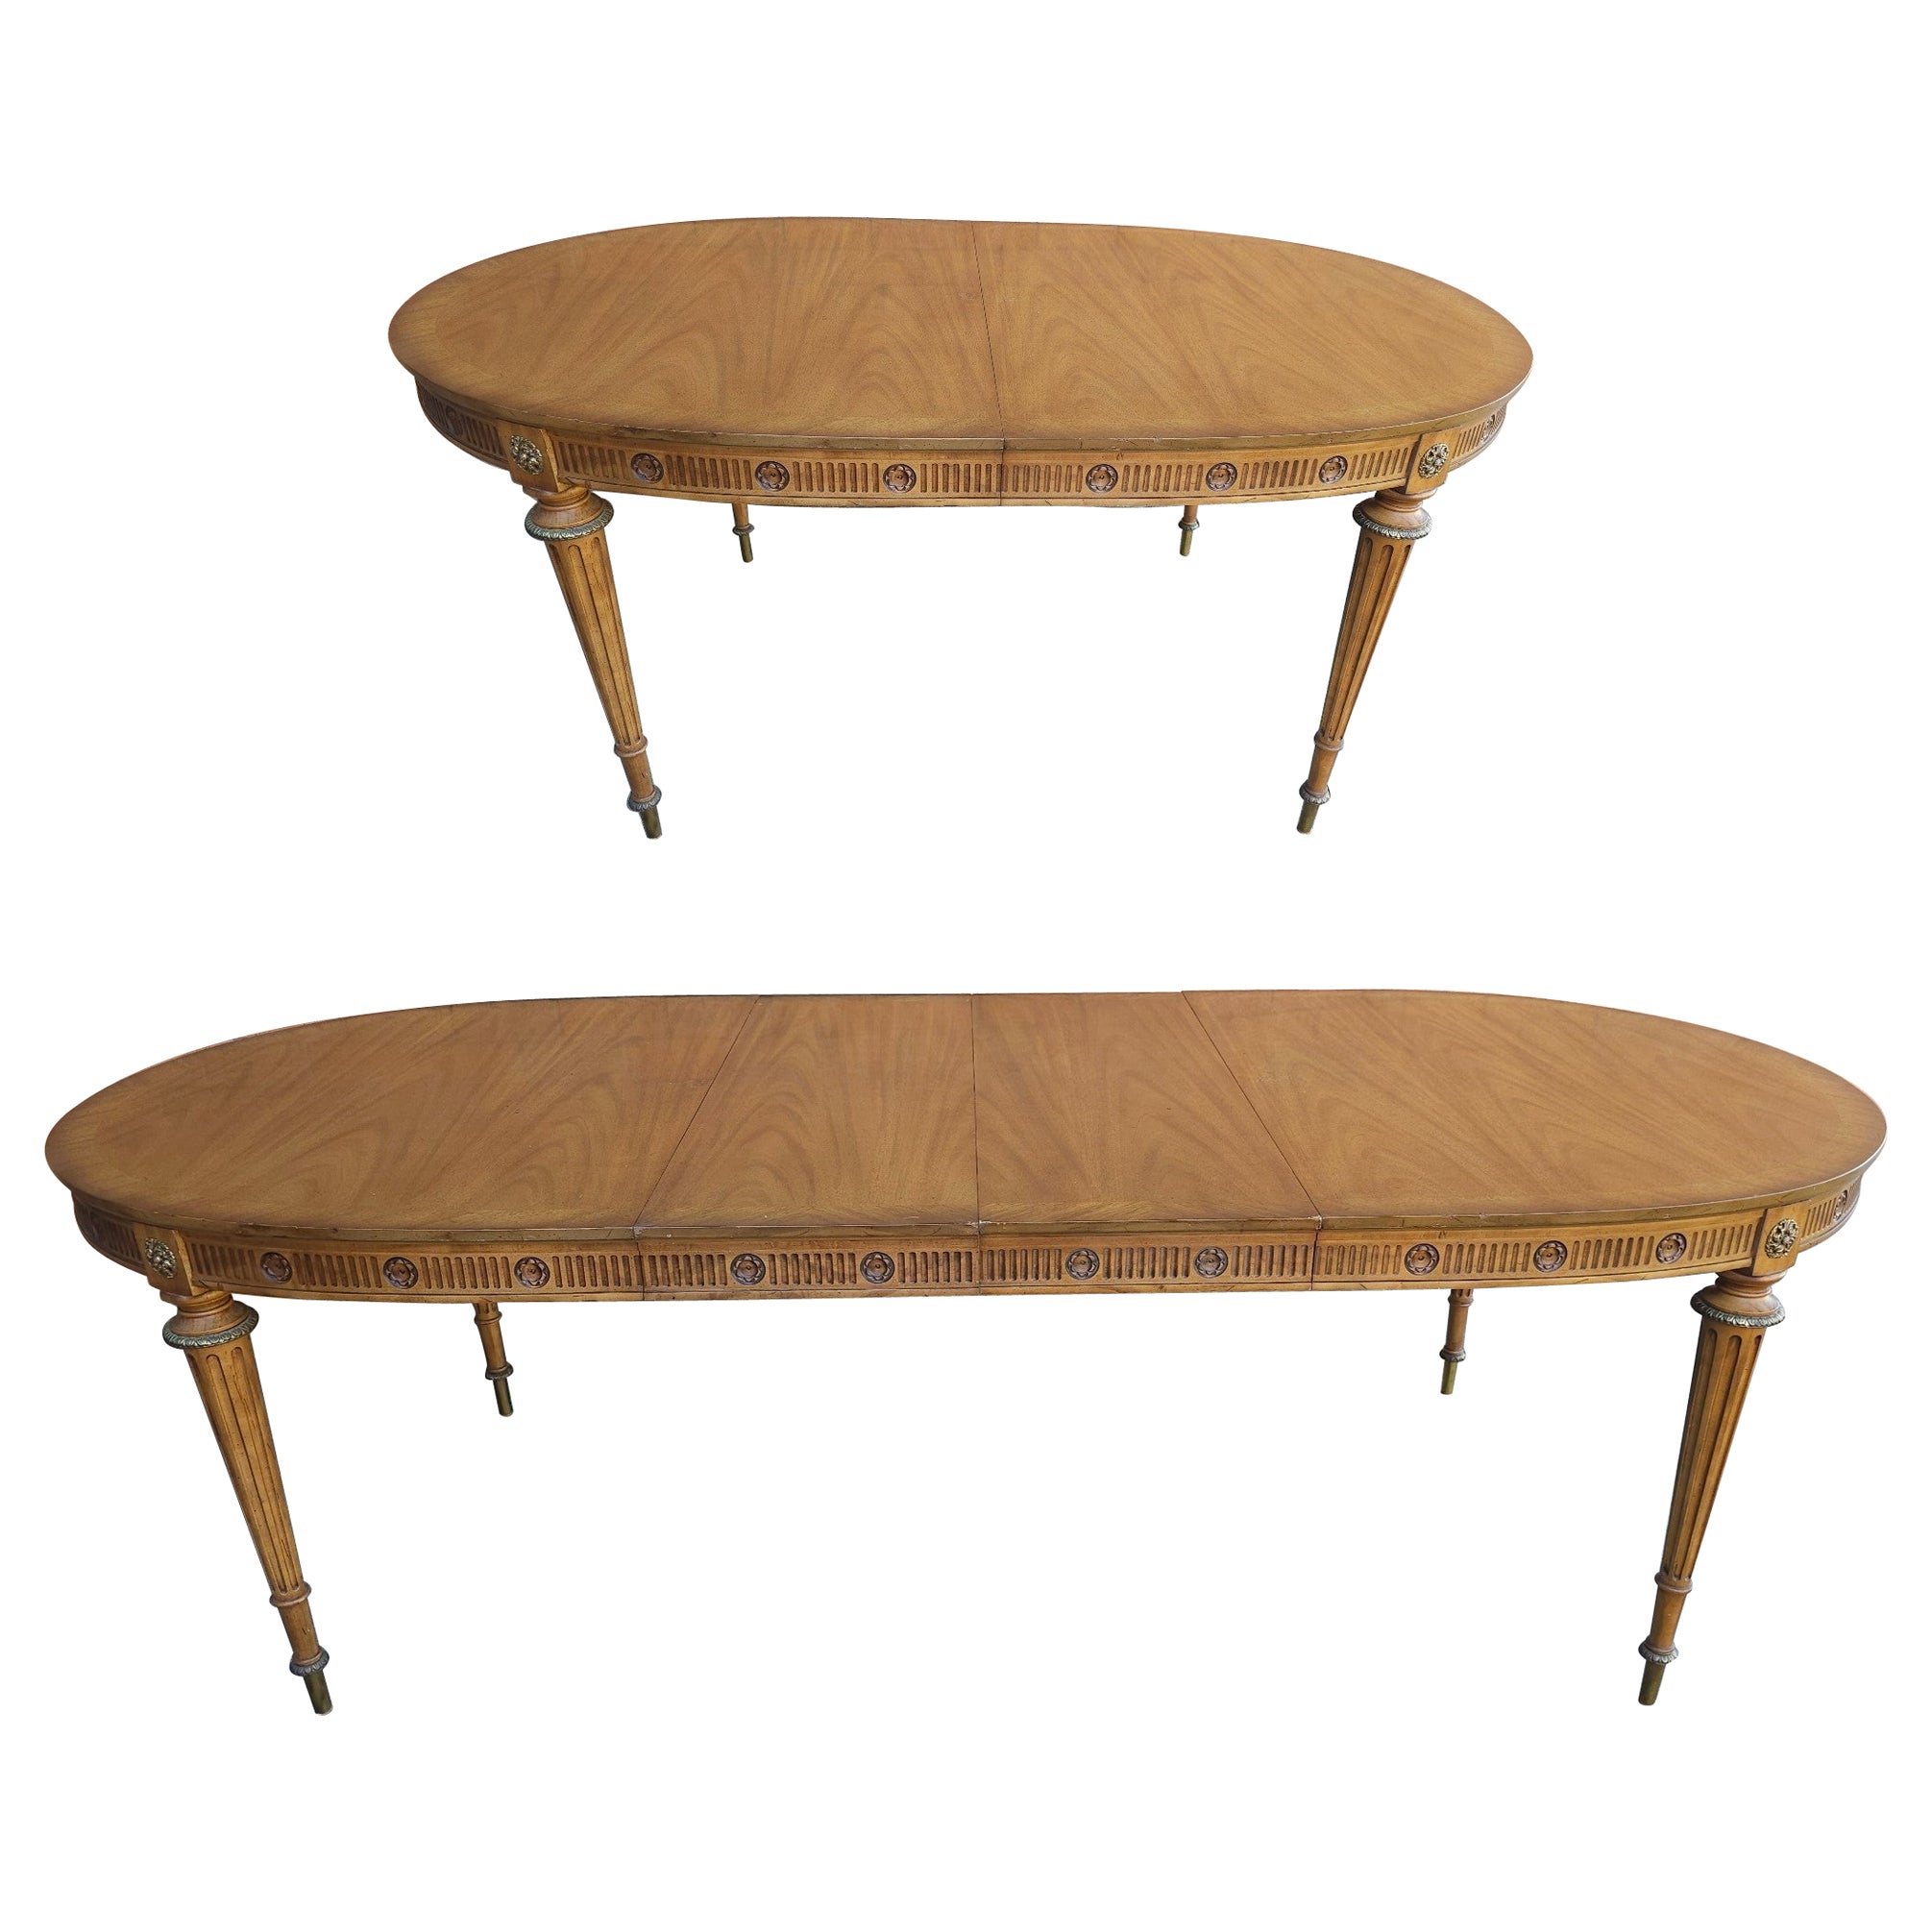 Louis XVI Brass Mounted French Walnut Oval Extension Dining Table W/ 2 Leaves